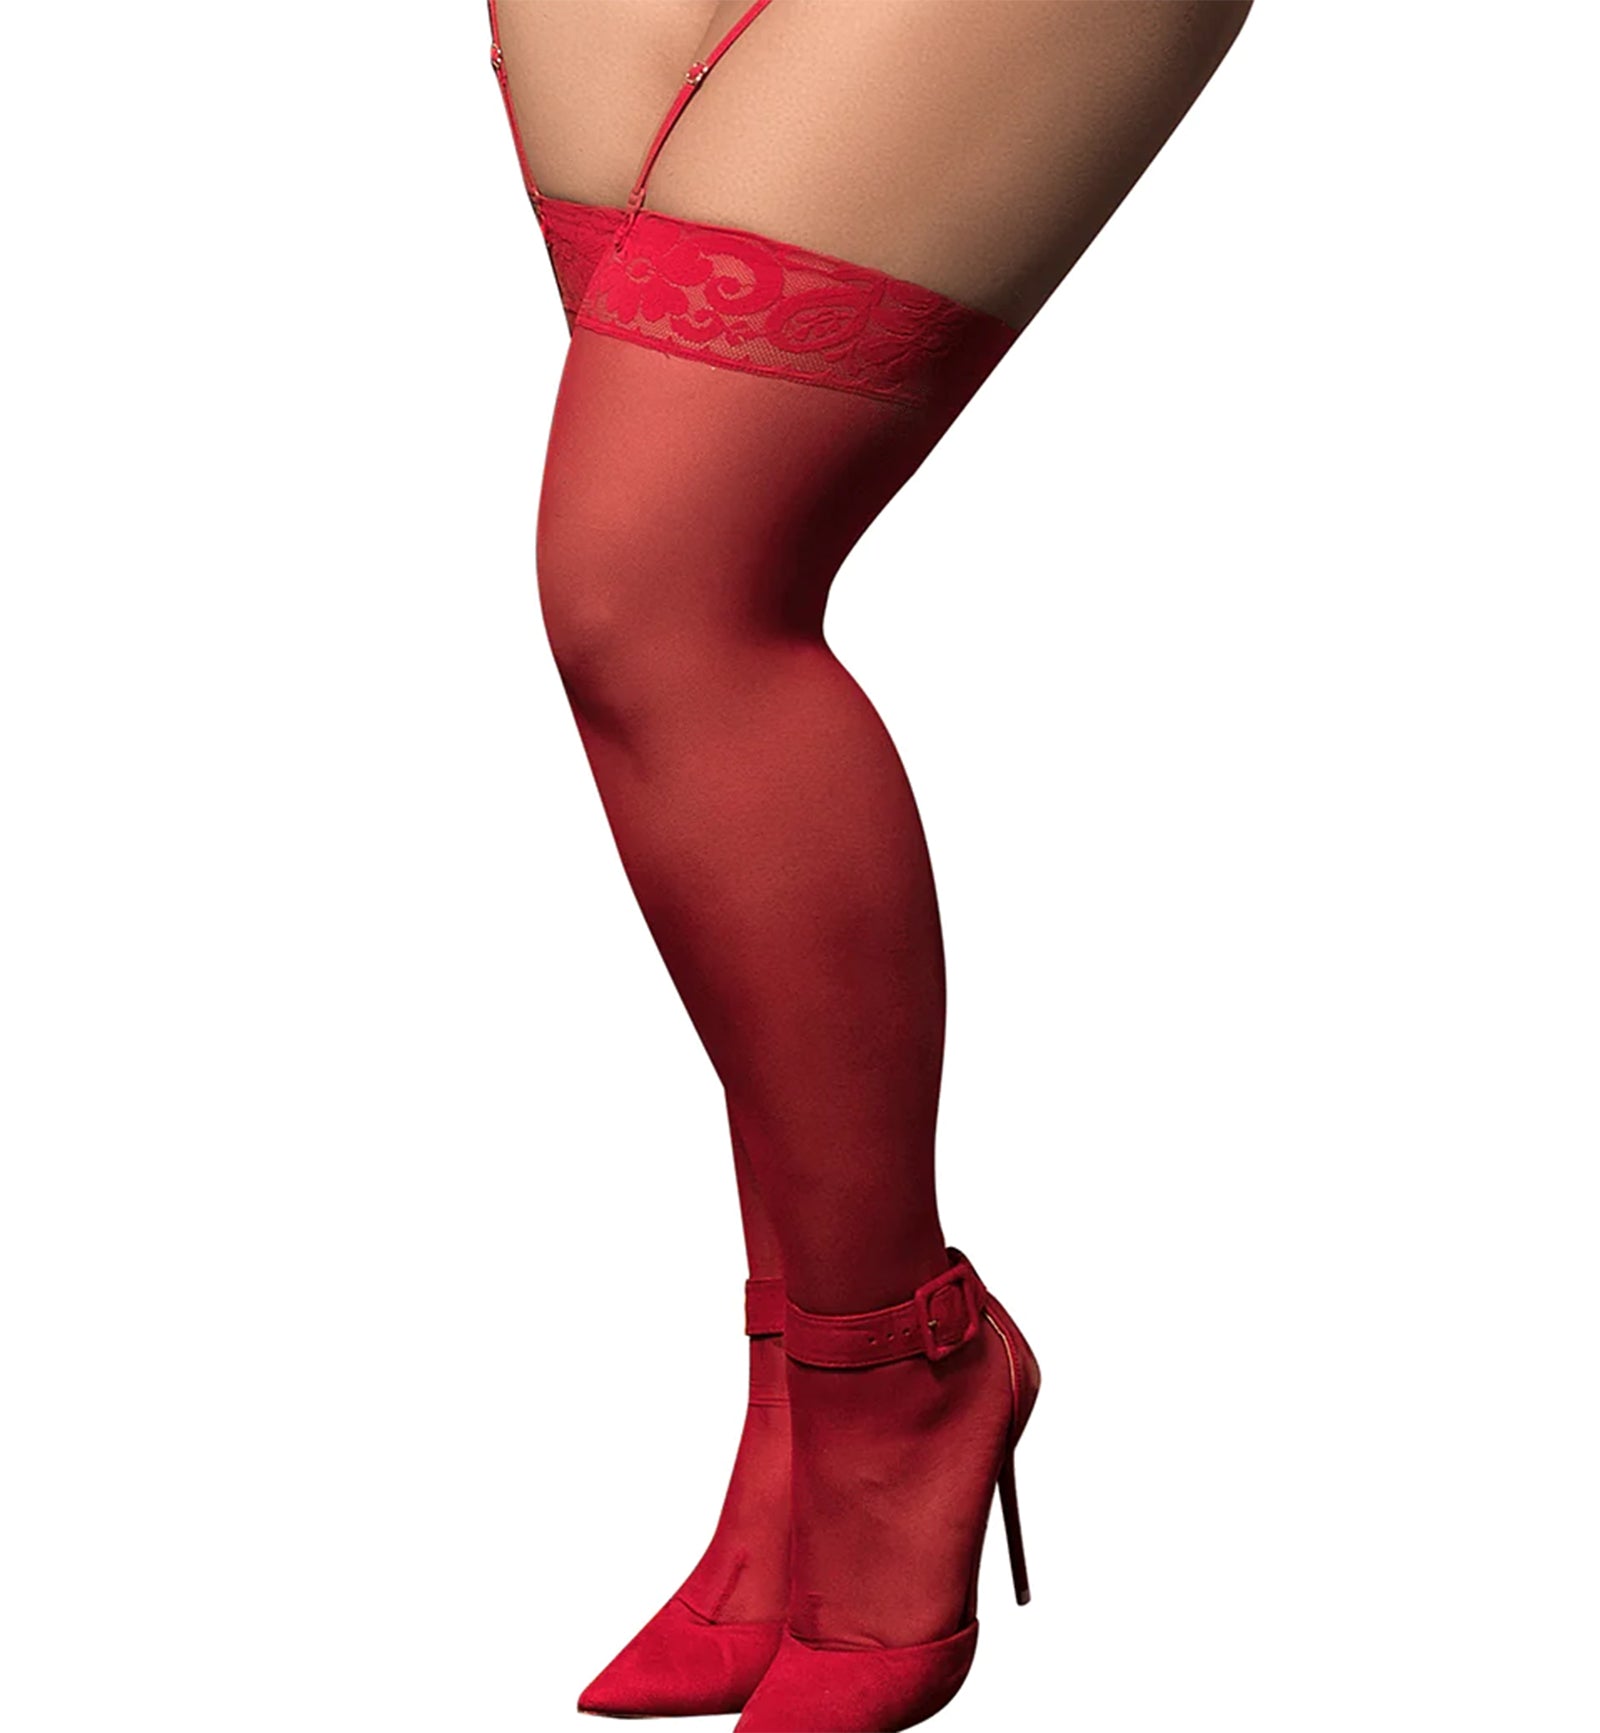 Mapale Mesh Thigh Highs Plus Size (1094X),Red - Red,One Size